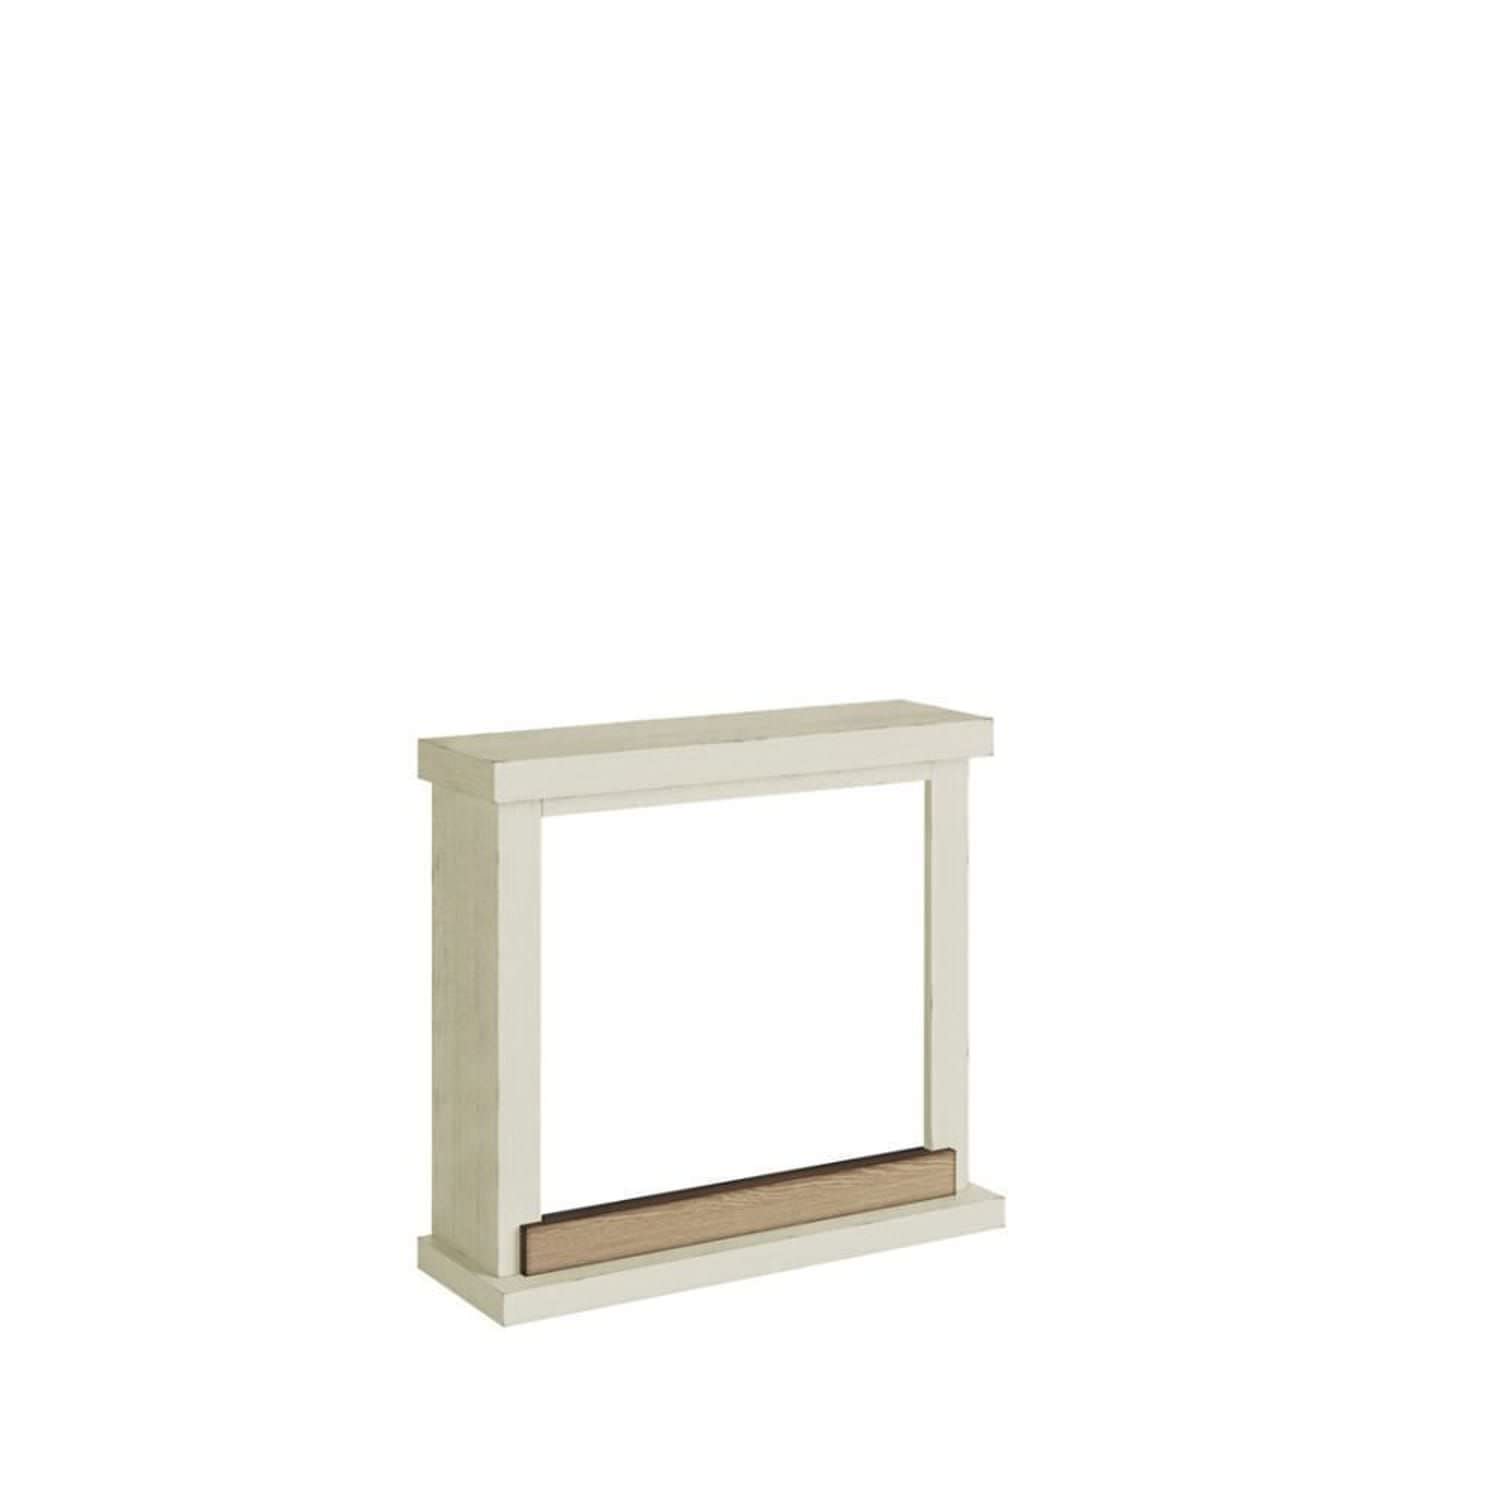 Ivory color frame for fireplace